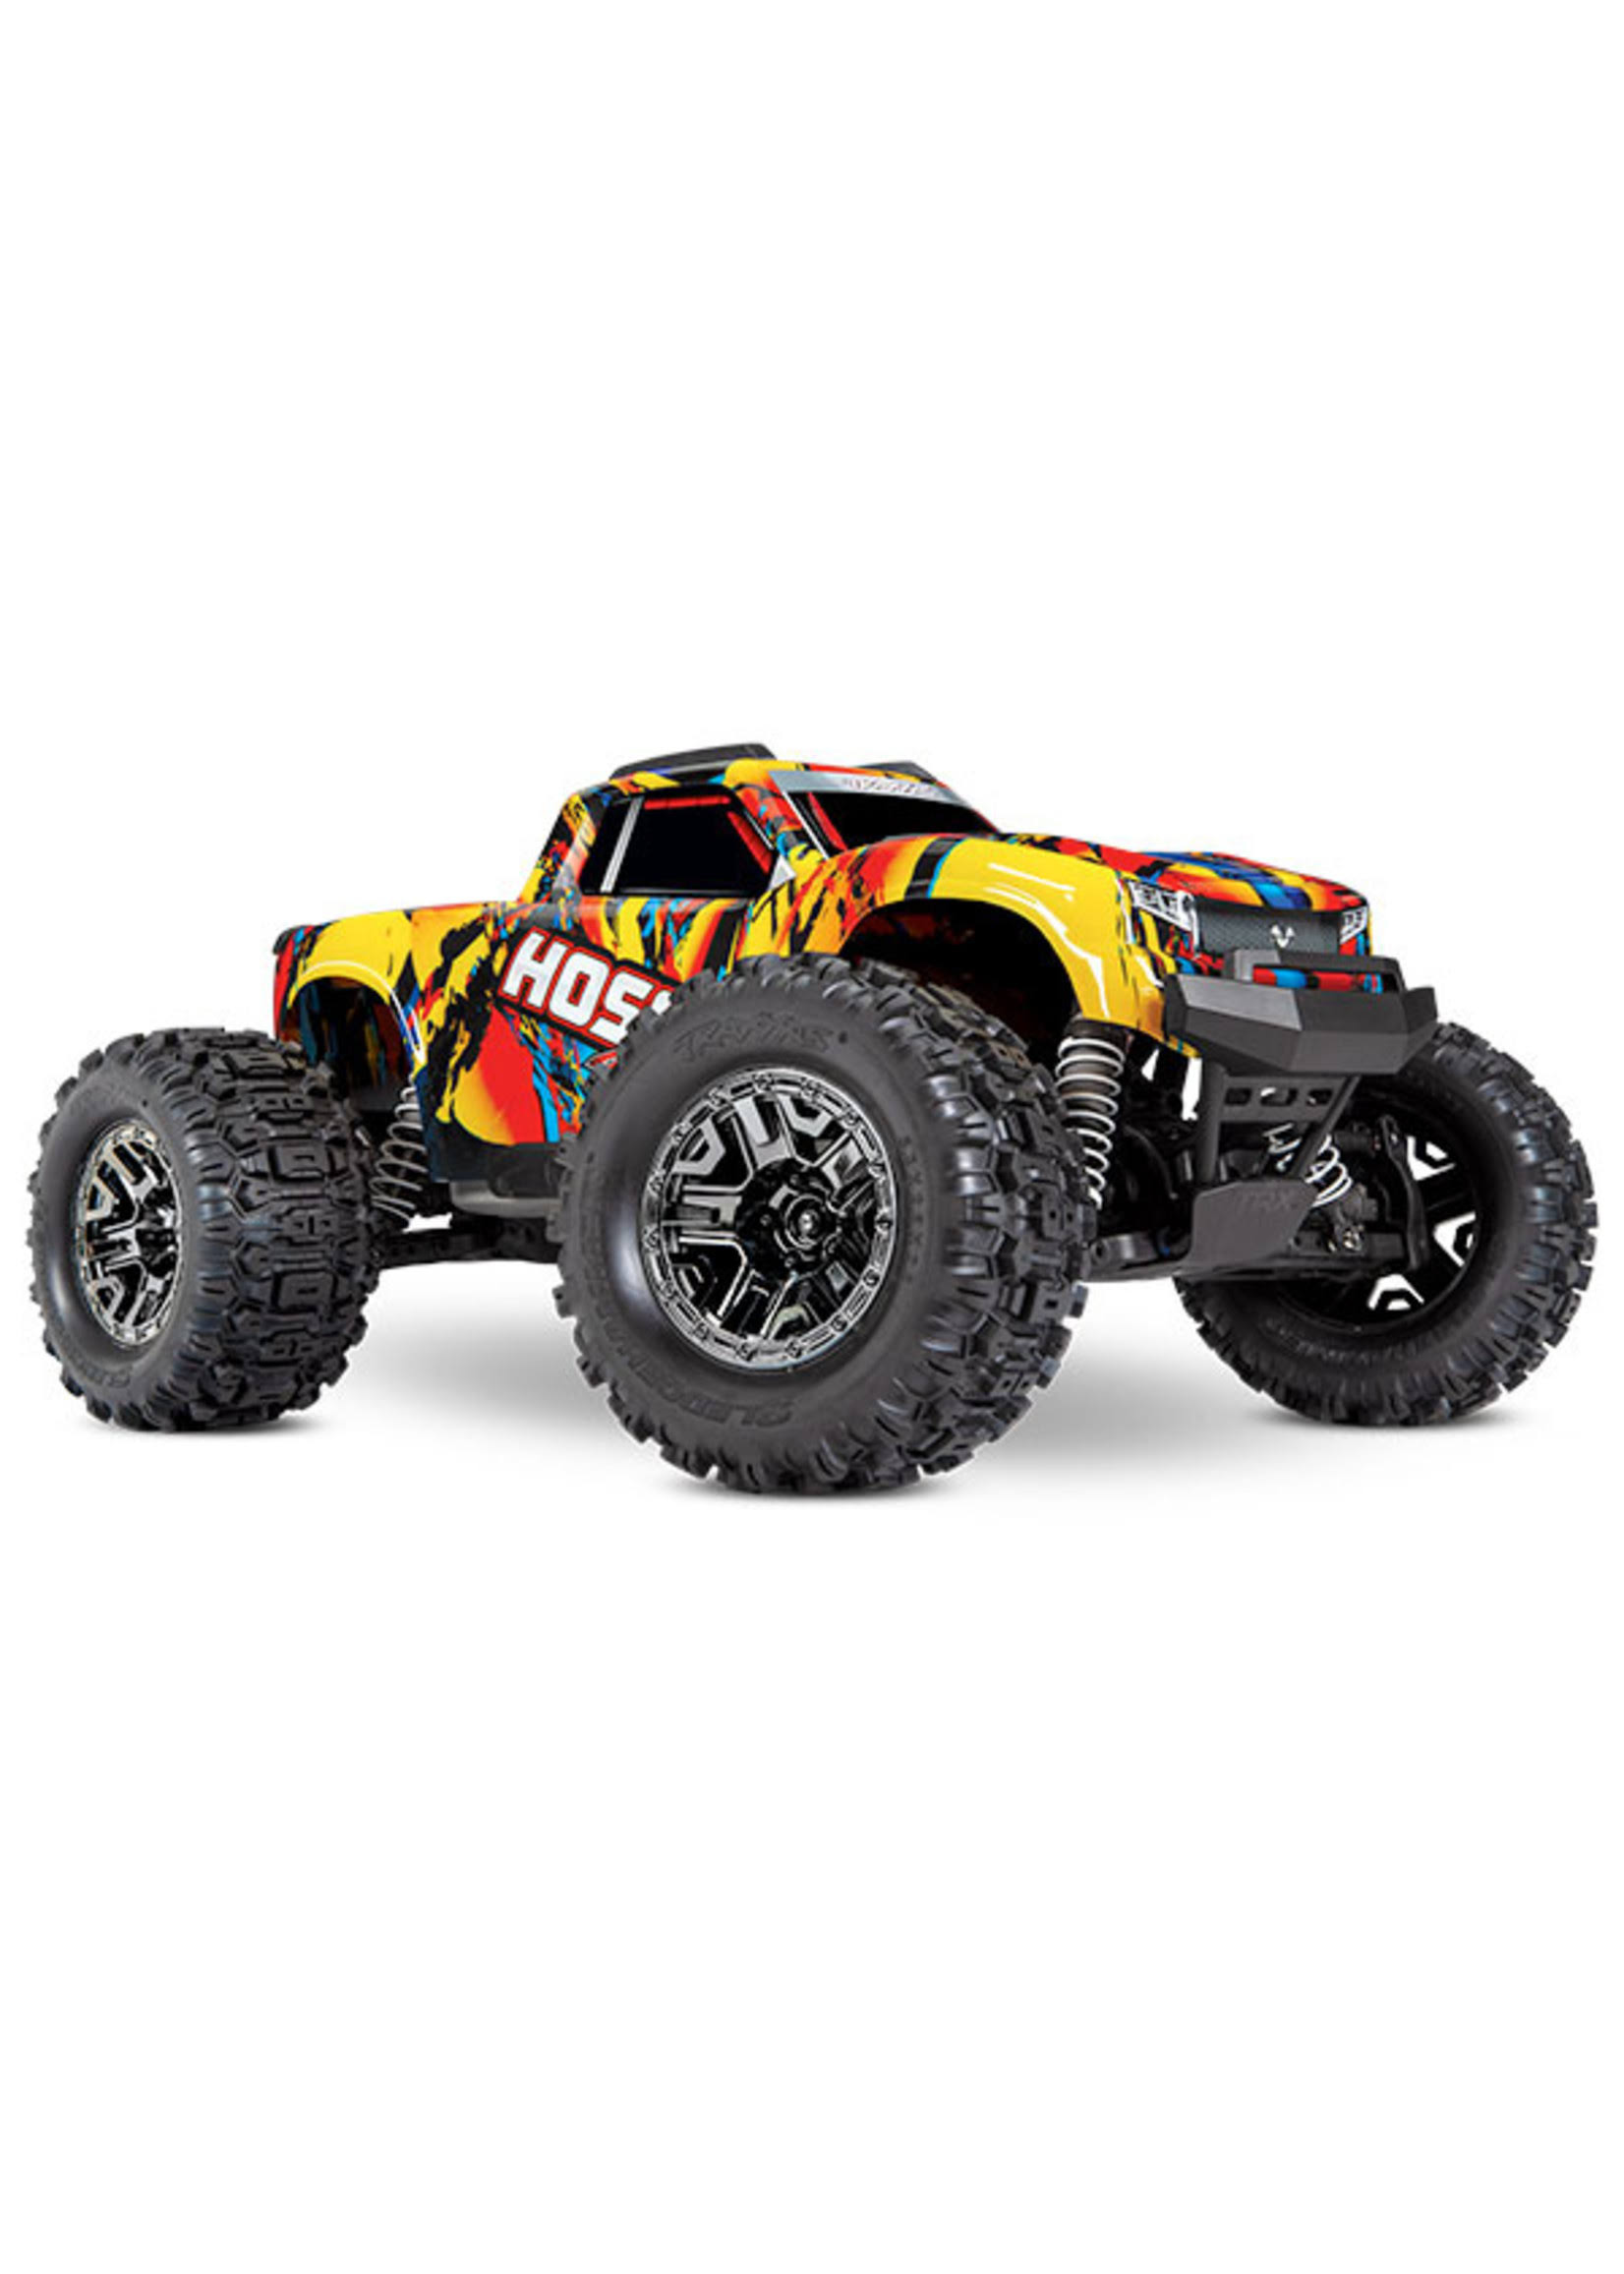 Traxxas Hoss 4X4 VXL 1/10 Scale 4WD Brushless Electric Monster Truck Yellow